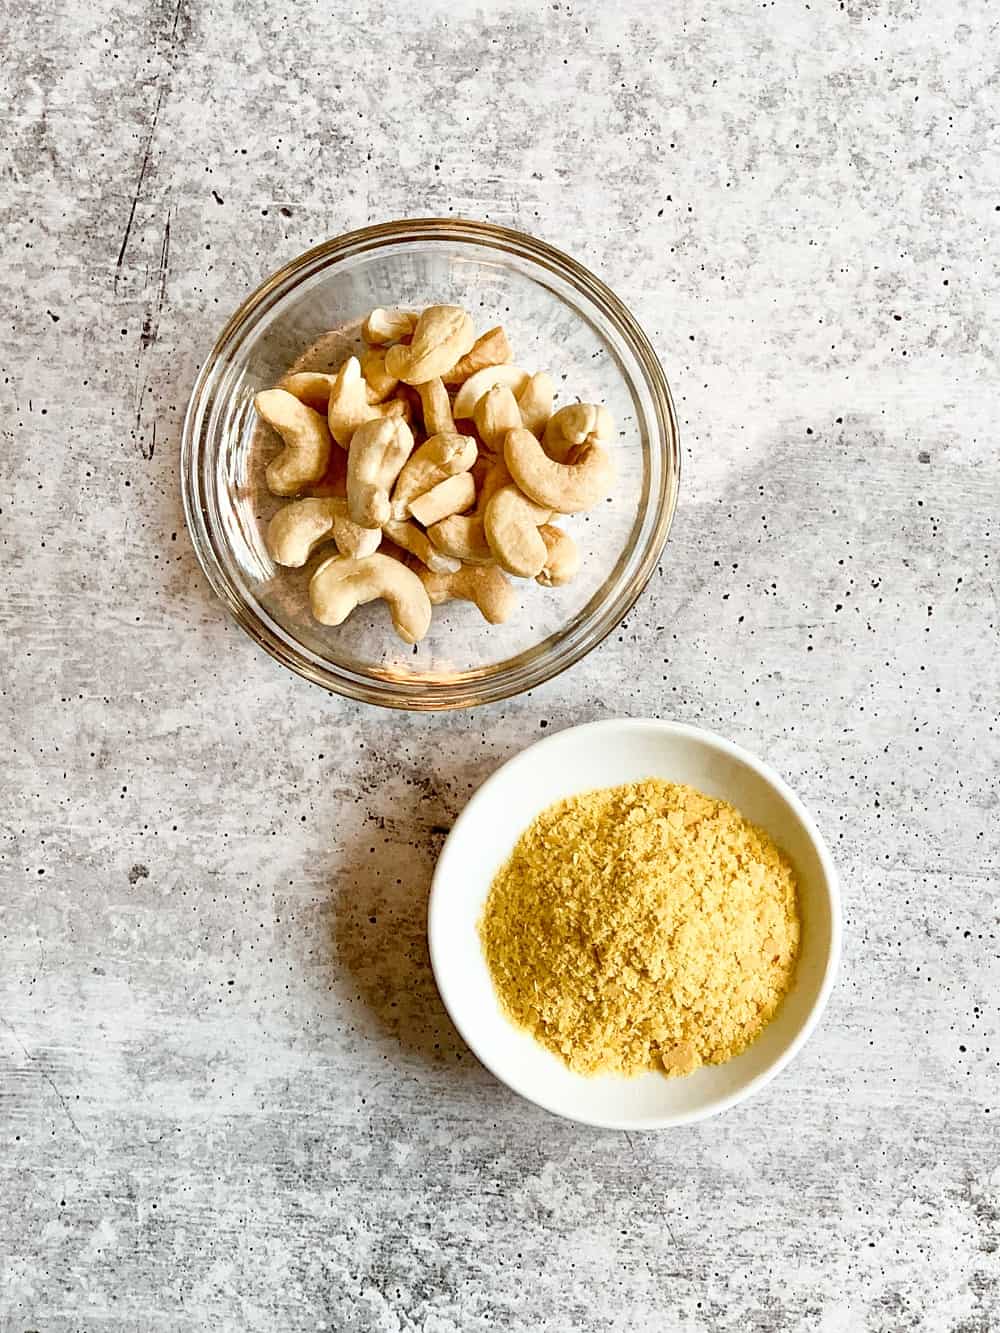 The top view and close up of a small glass bowl of cashews next to a smaller white bowl of nutritional yeast--against a rough grey backdrop.